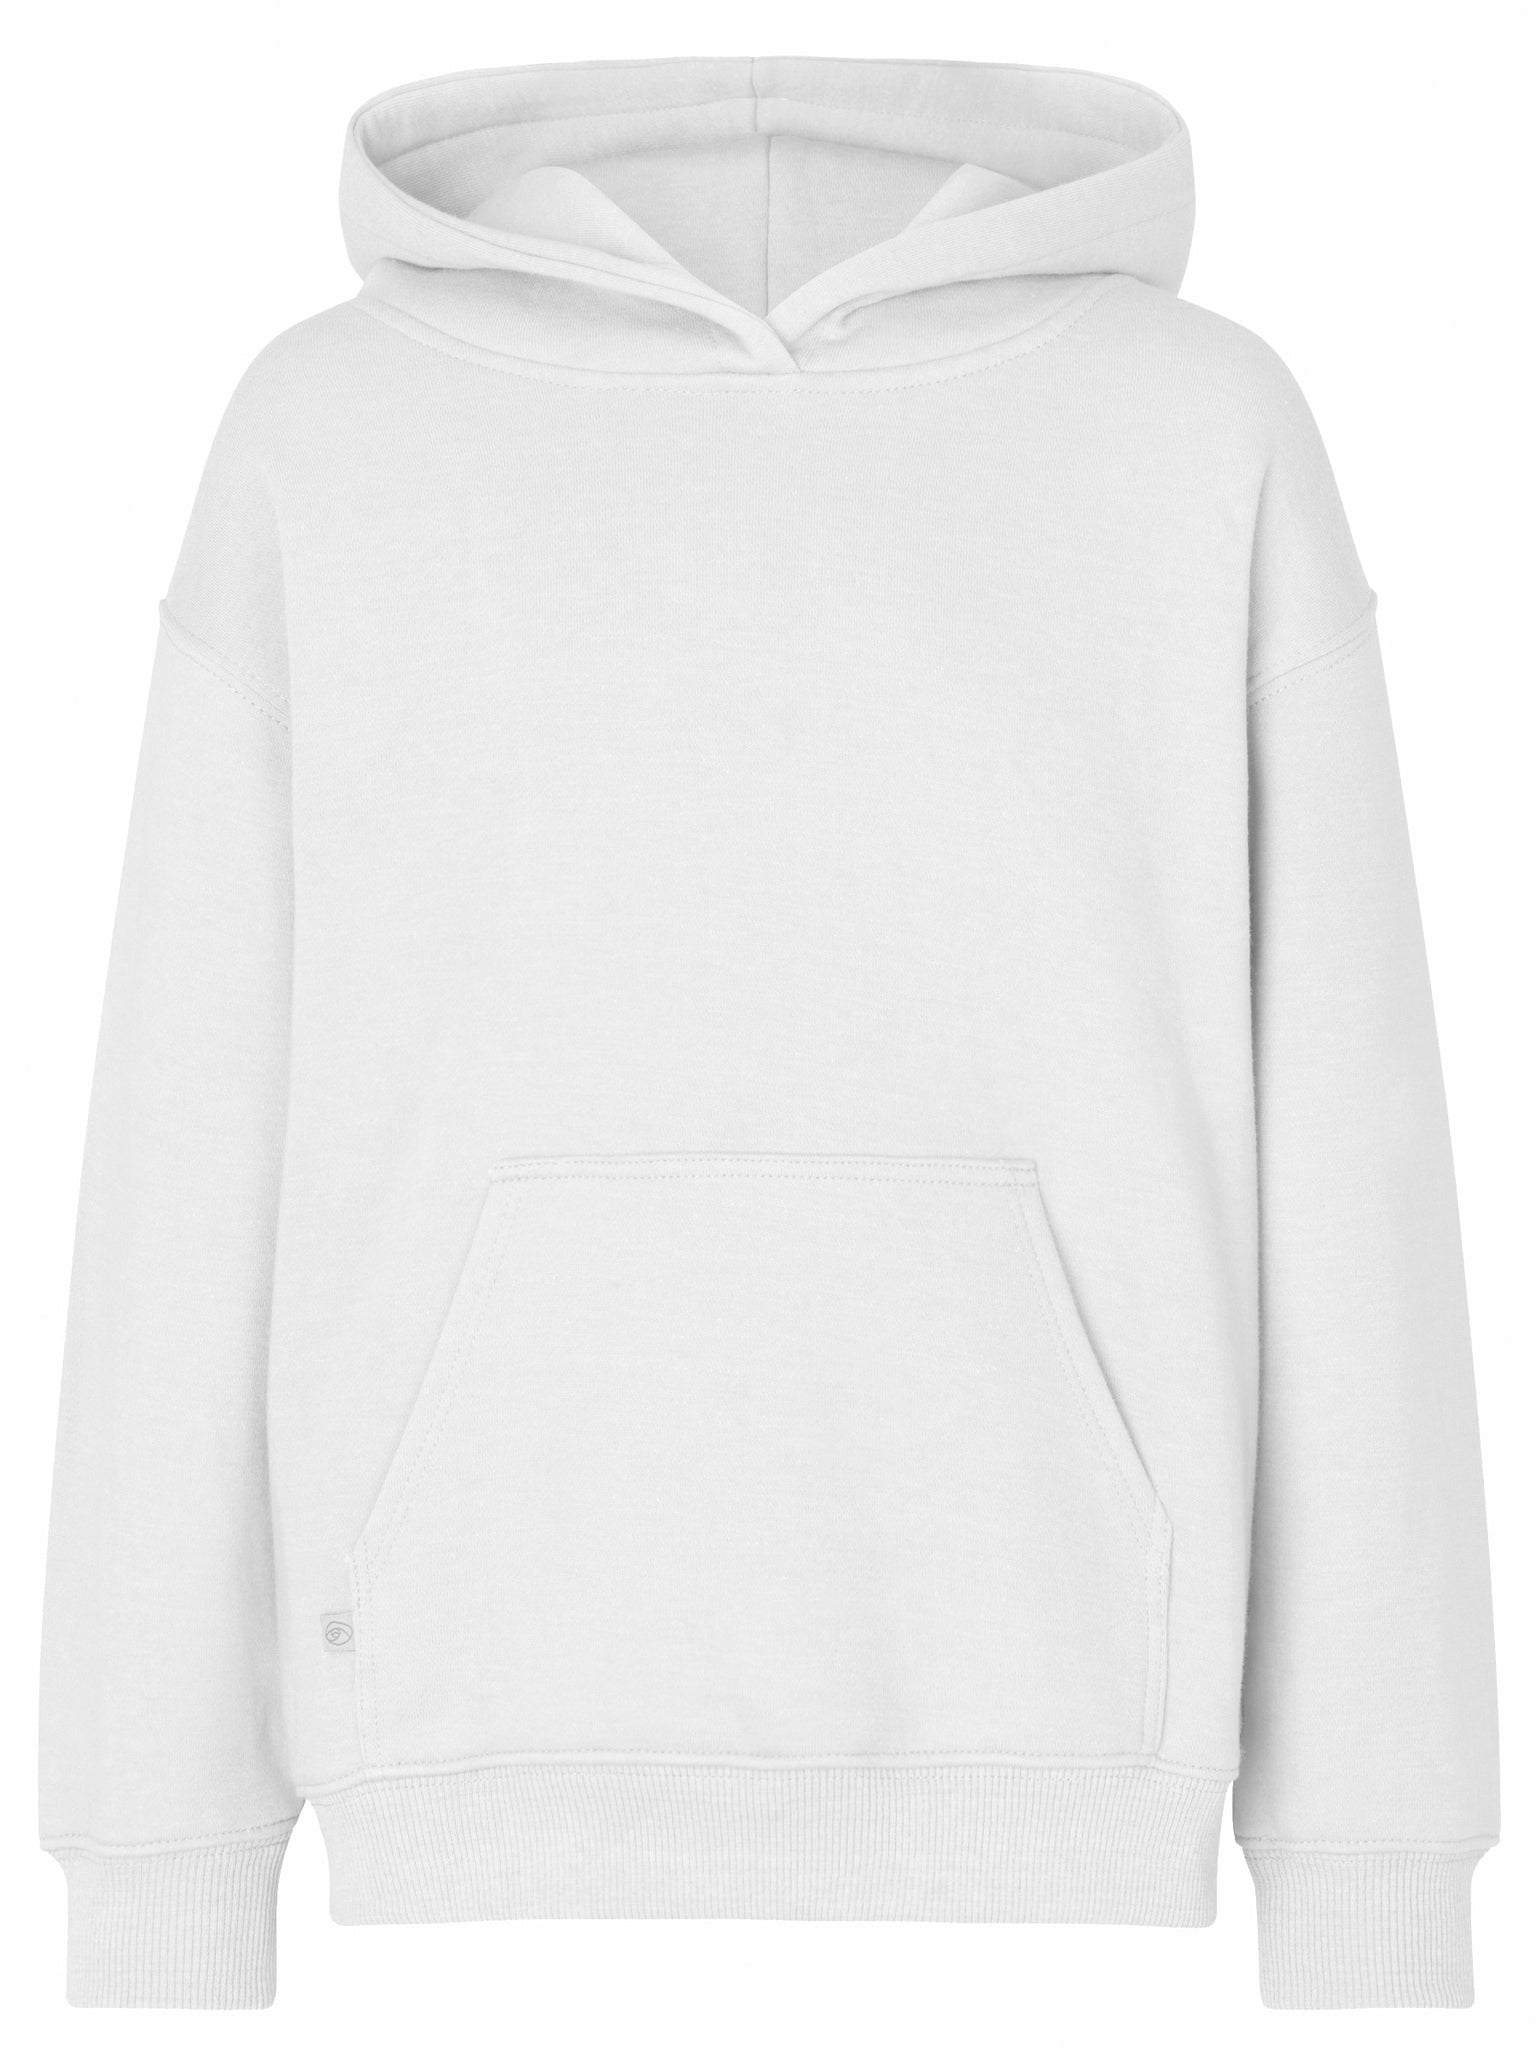 Hoodie for girls